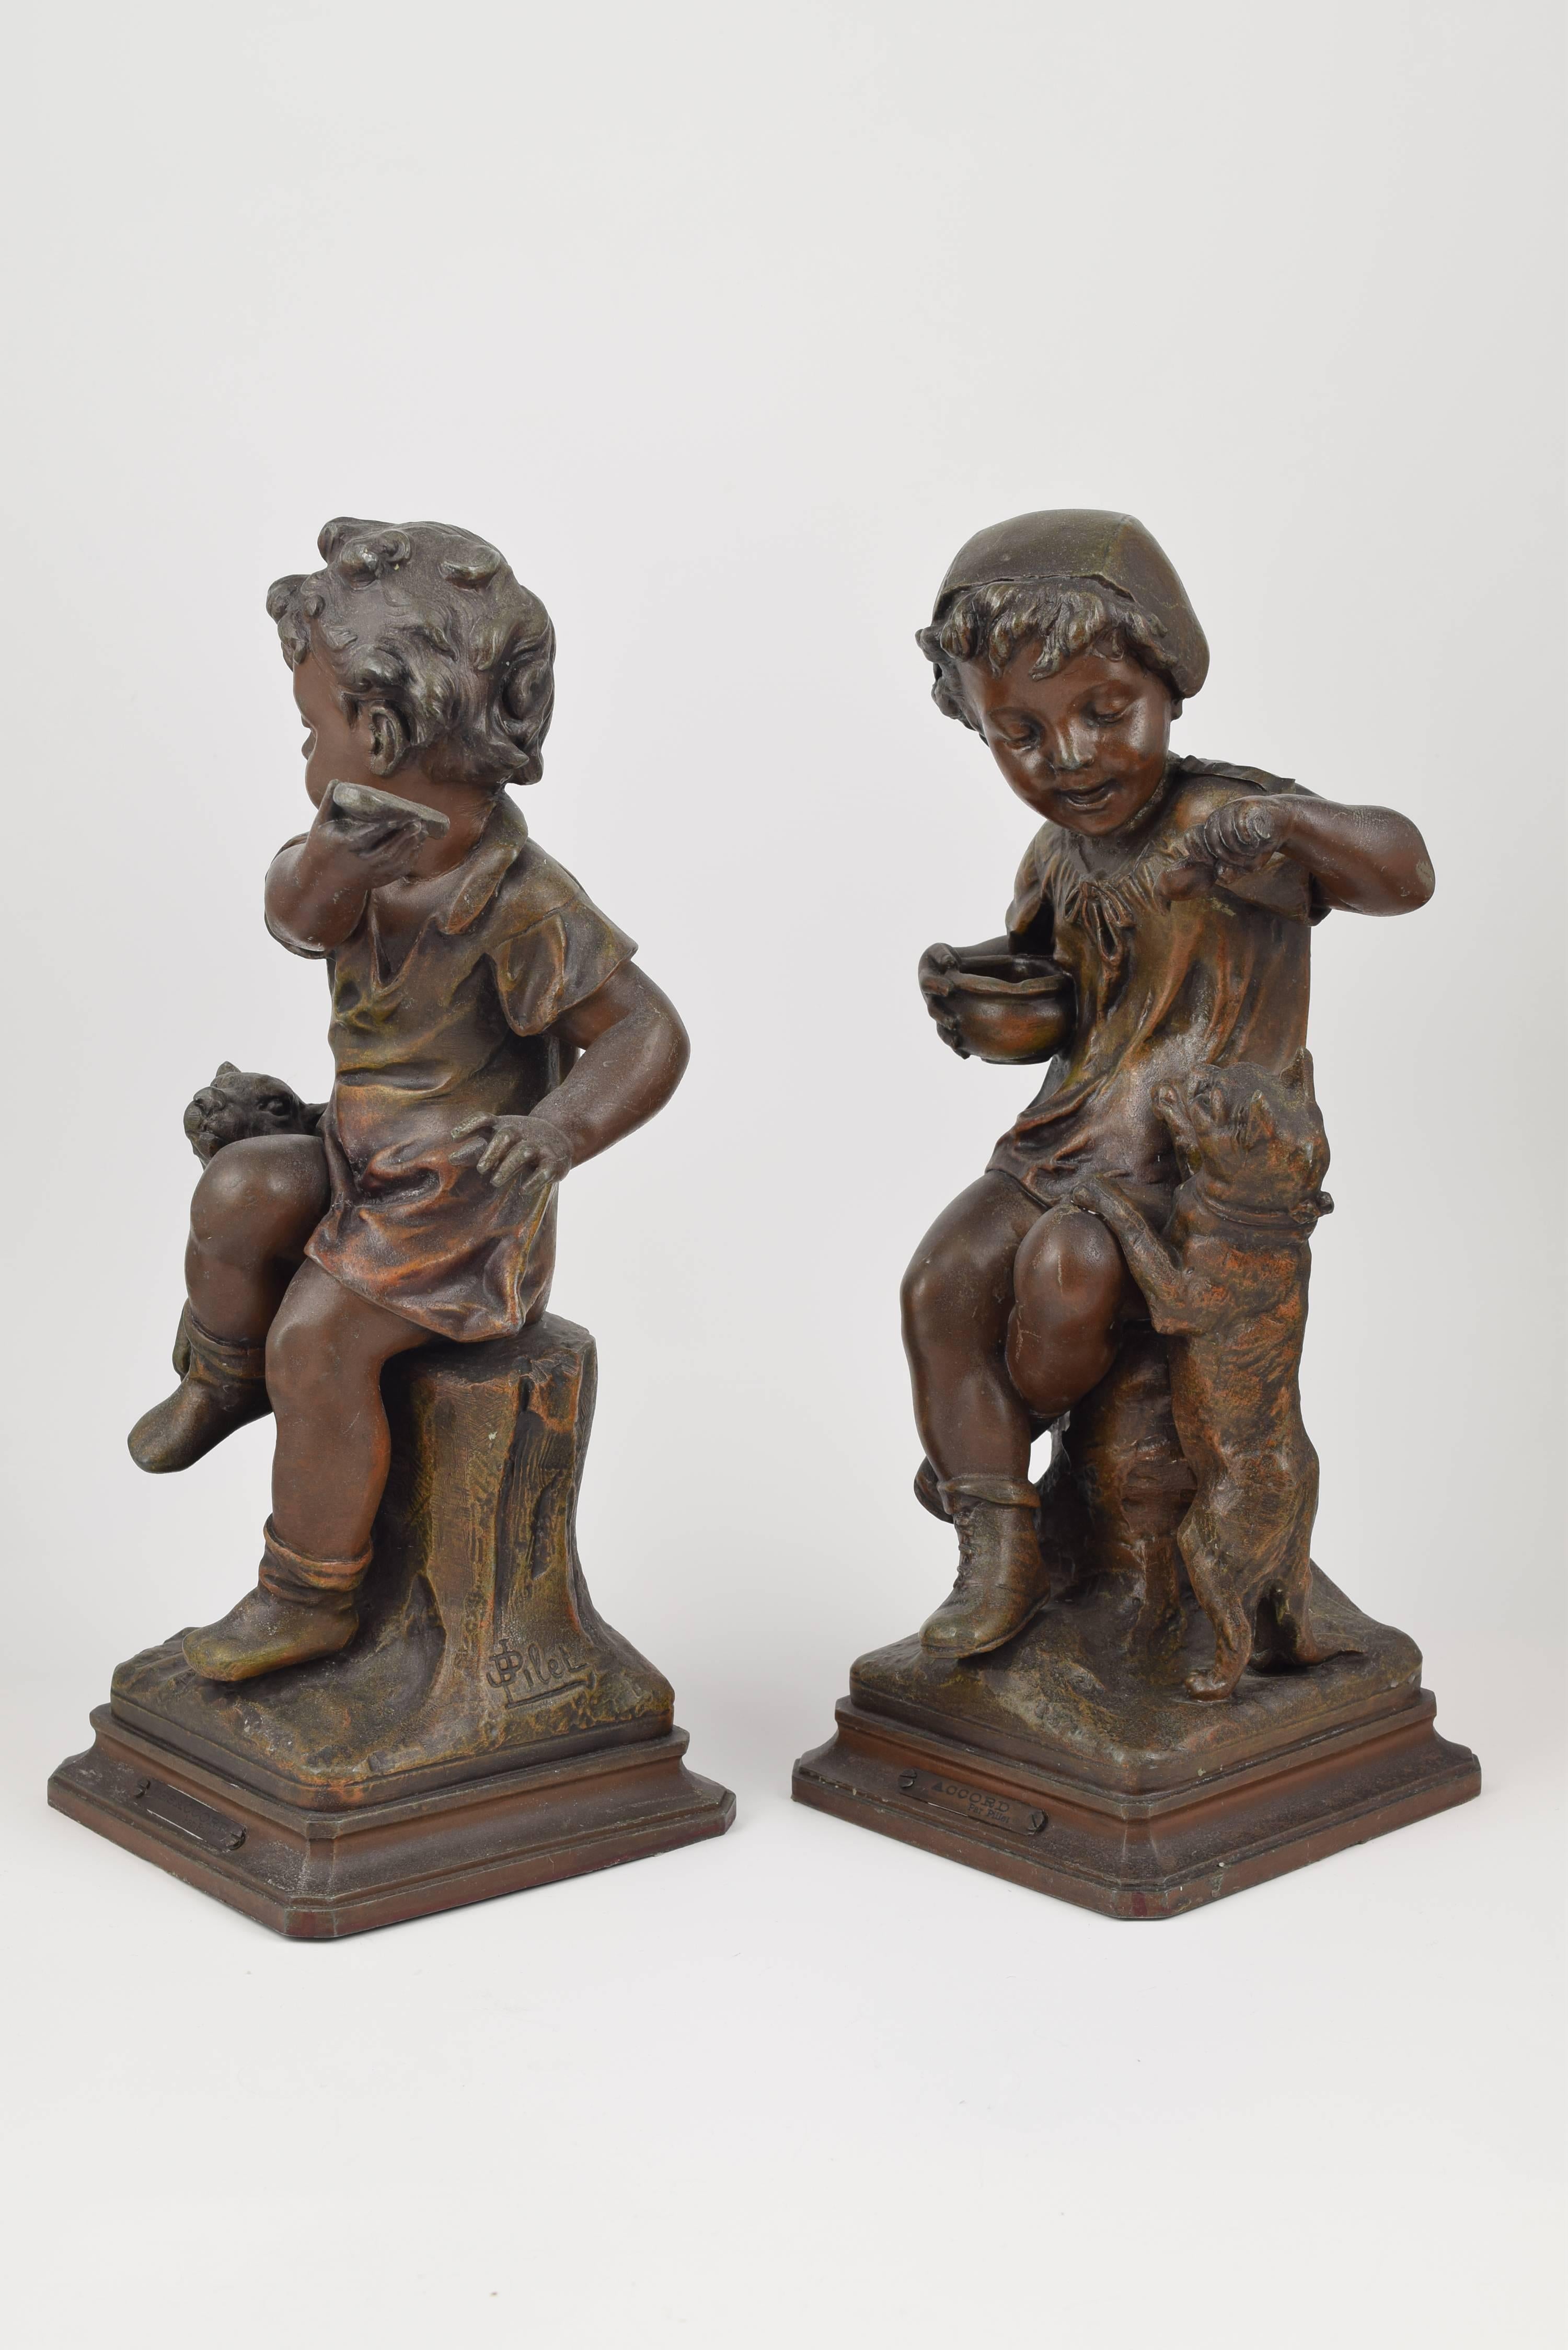 A Parisian sculptor active between the second half of the 19th century and the early 20th century, Léon Pilet is widely known today for his sculptures of medium and small format, mainly made in bronze. Pilet was a prolific artist and he treated the